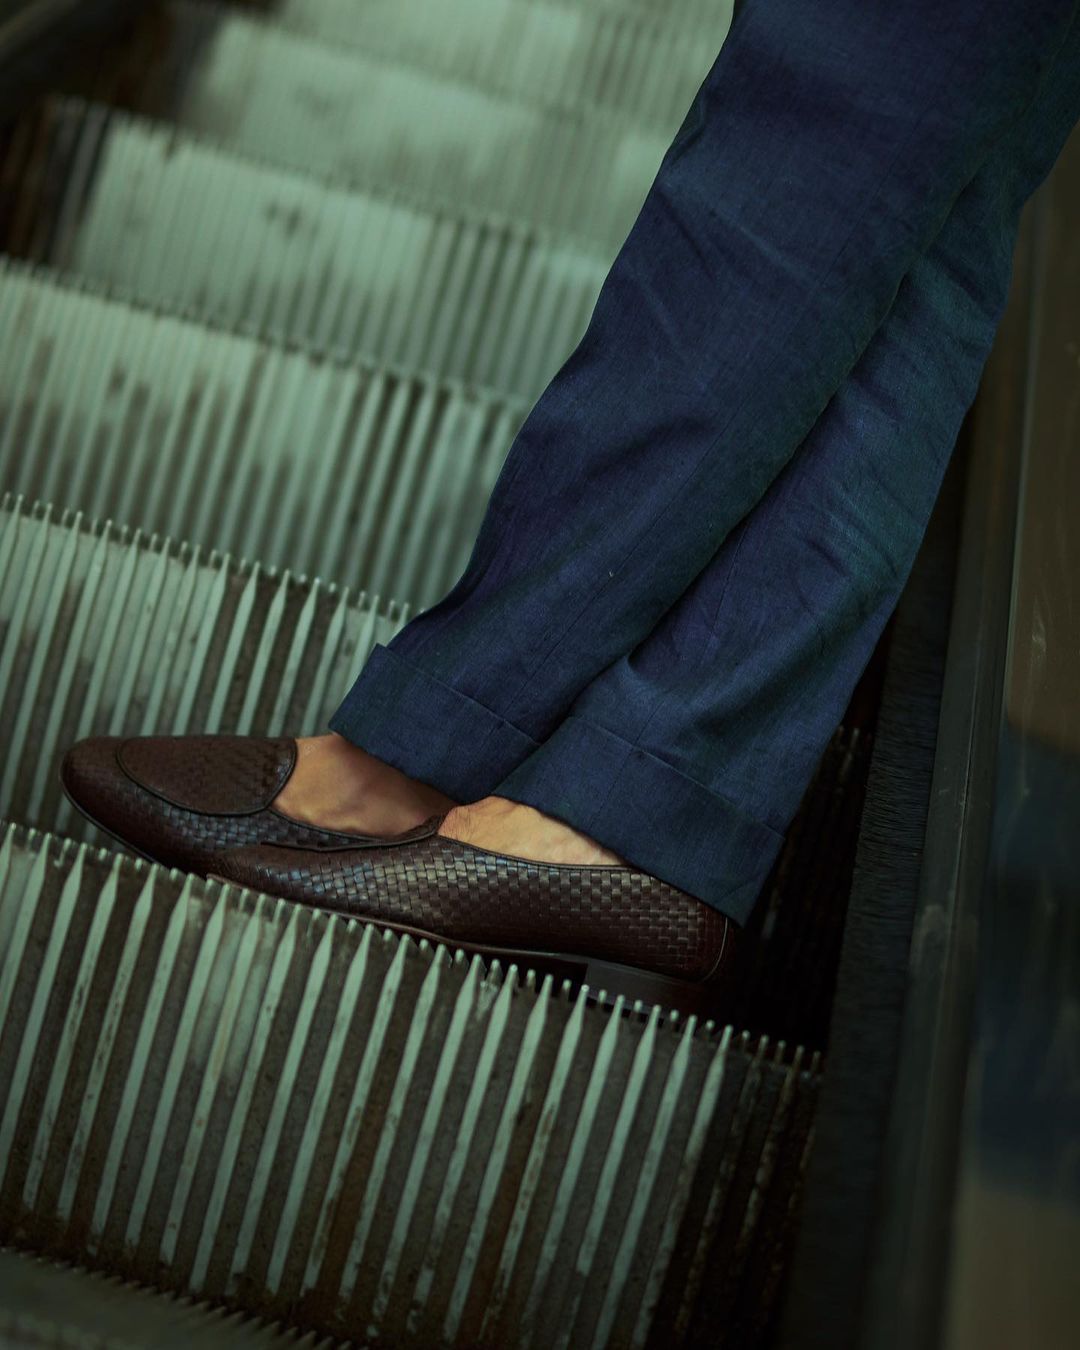 Close up of model legs and shoes wearing the safari jacket in linen for men by Luxire in dark indigo